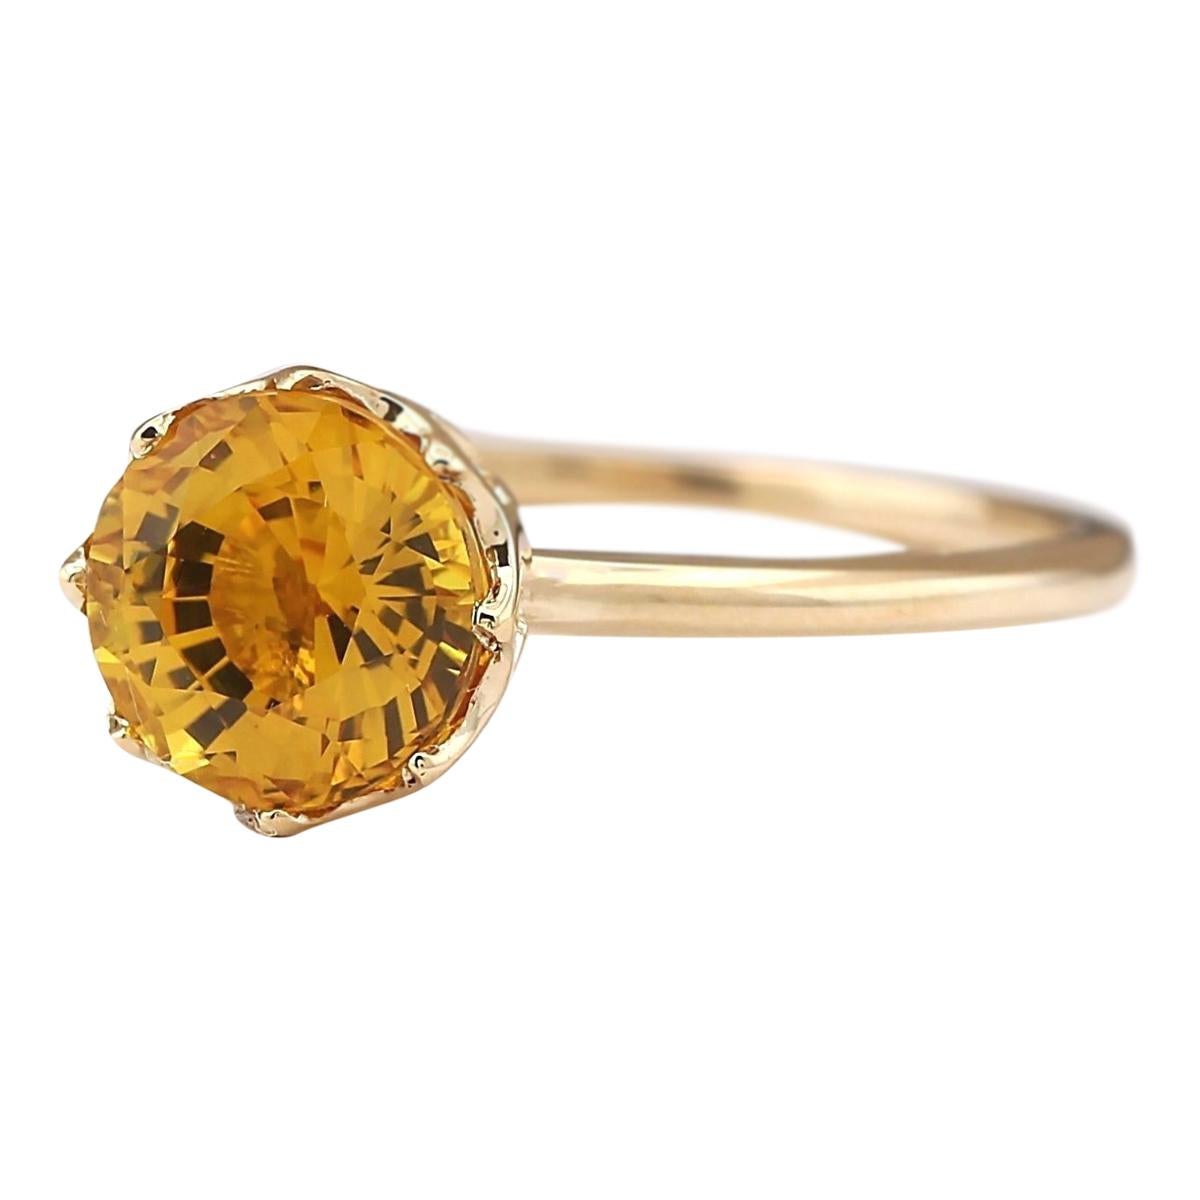 Stamped: 14K Yellow Gold
Total Ring Weight: 1.8 Grams
Total Natural Sapphire Weight is 1.80 Carat
Color: Yellow
Face Measures: 7.00x7.00 mm
Sku: [703276W]